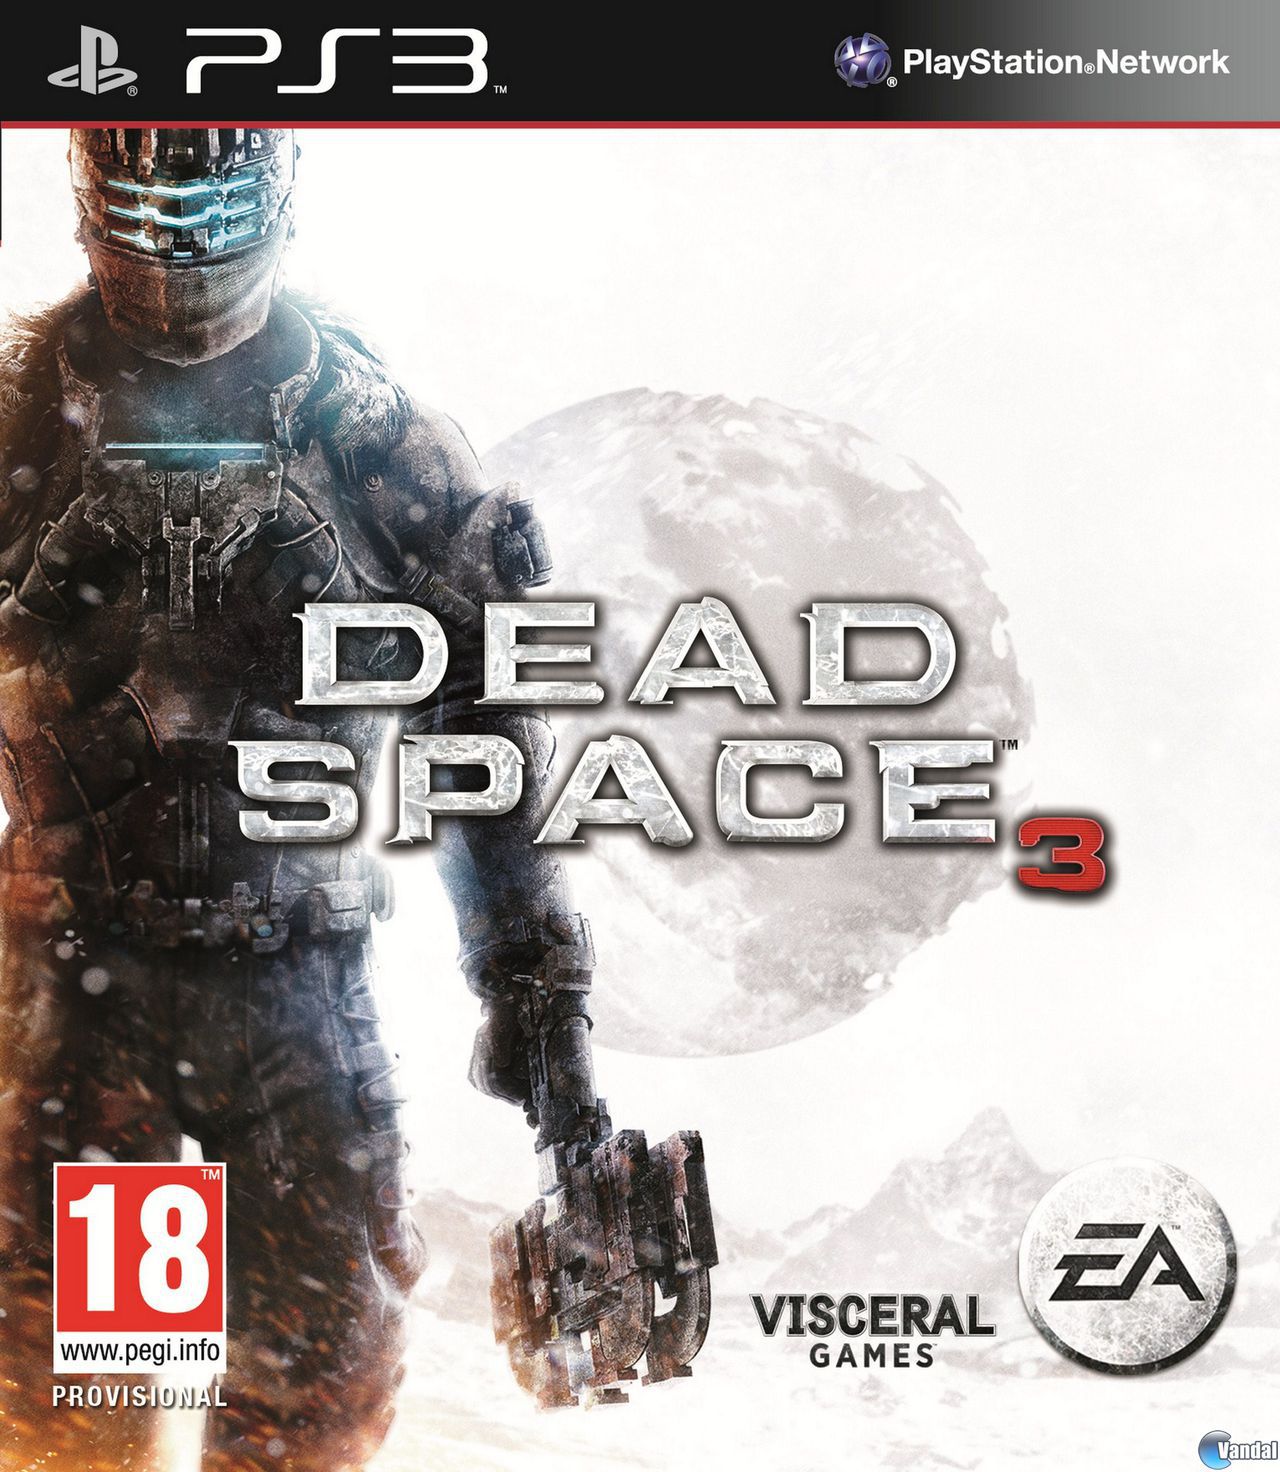 dead space 3 xbox one online coop?